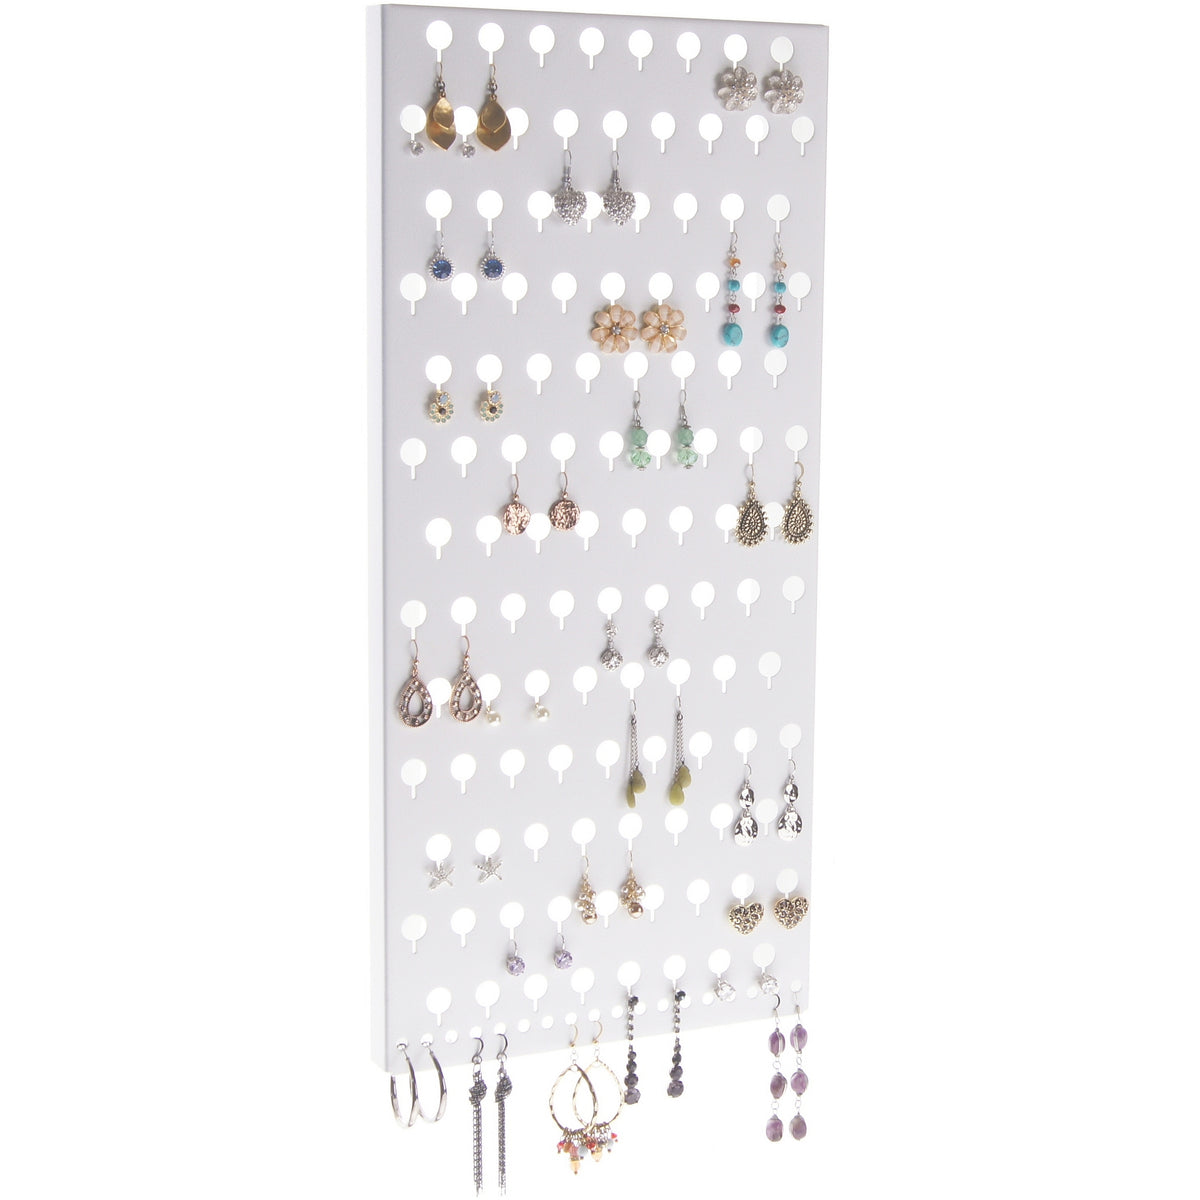 Angelynn's Wall Earring Holder Organizer for Big Large Hoop Long Post Stud  Earrings Hanging Jewelry Closet Storage Rack with Shelf, Rose White